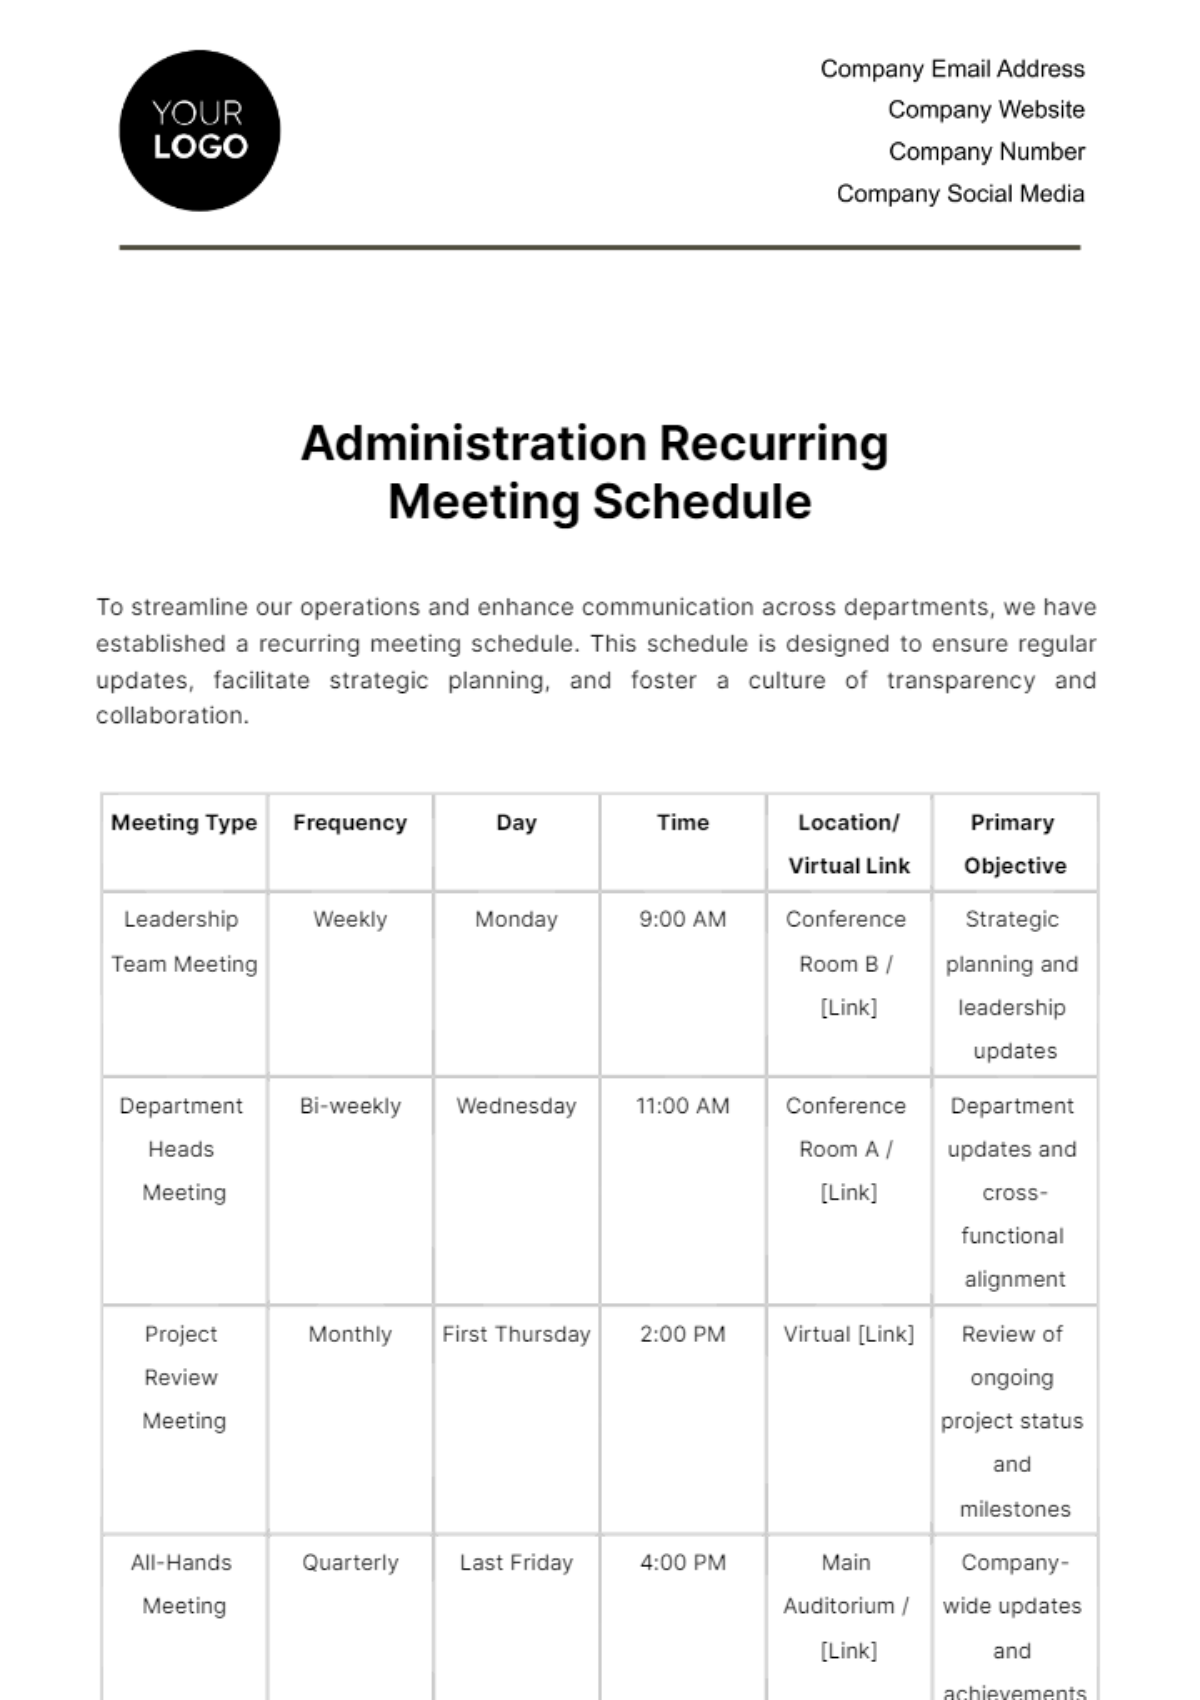 Administration Recurring Meeting Schedule Template